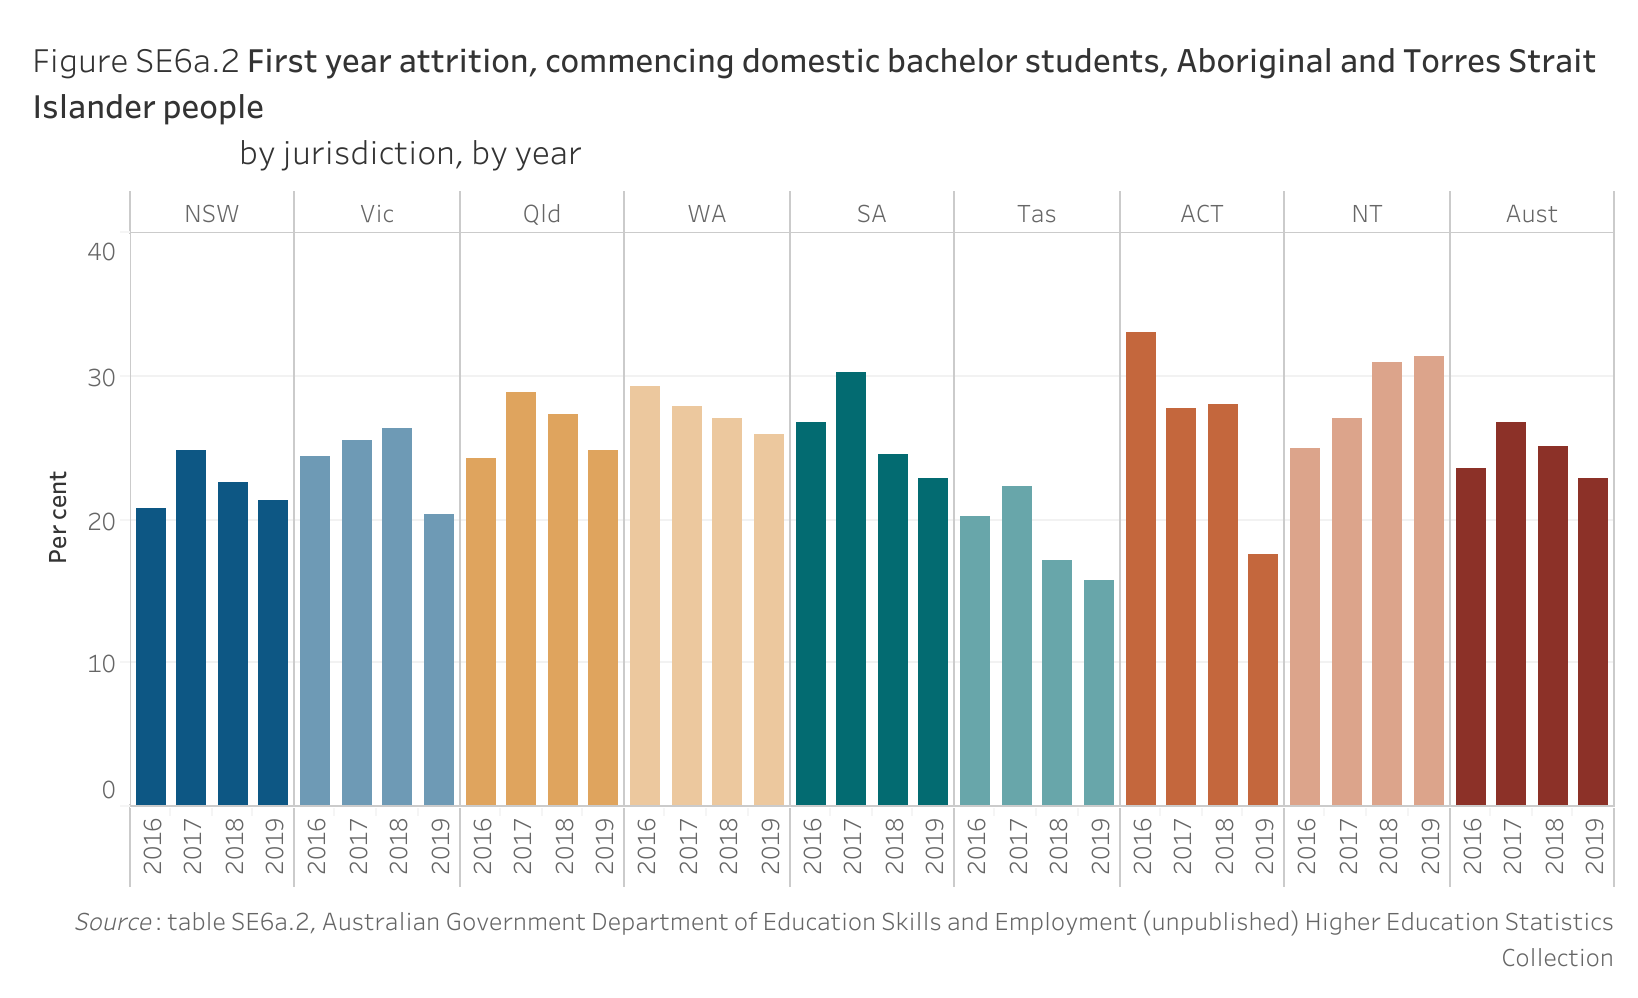 Figure SE6a.2. Bar chart showing the proportion of Aboriginal and Torres Strait Islander commencing domestic bachelor students who did not return to study the following year (first year attrition), by jurisdiction and by year. Data table of figure of SE6a.2 is below.